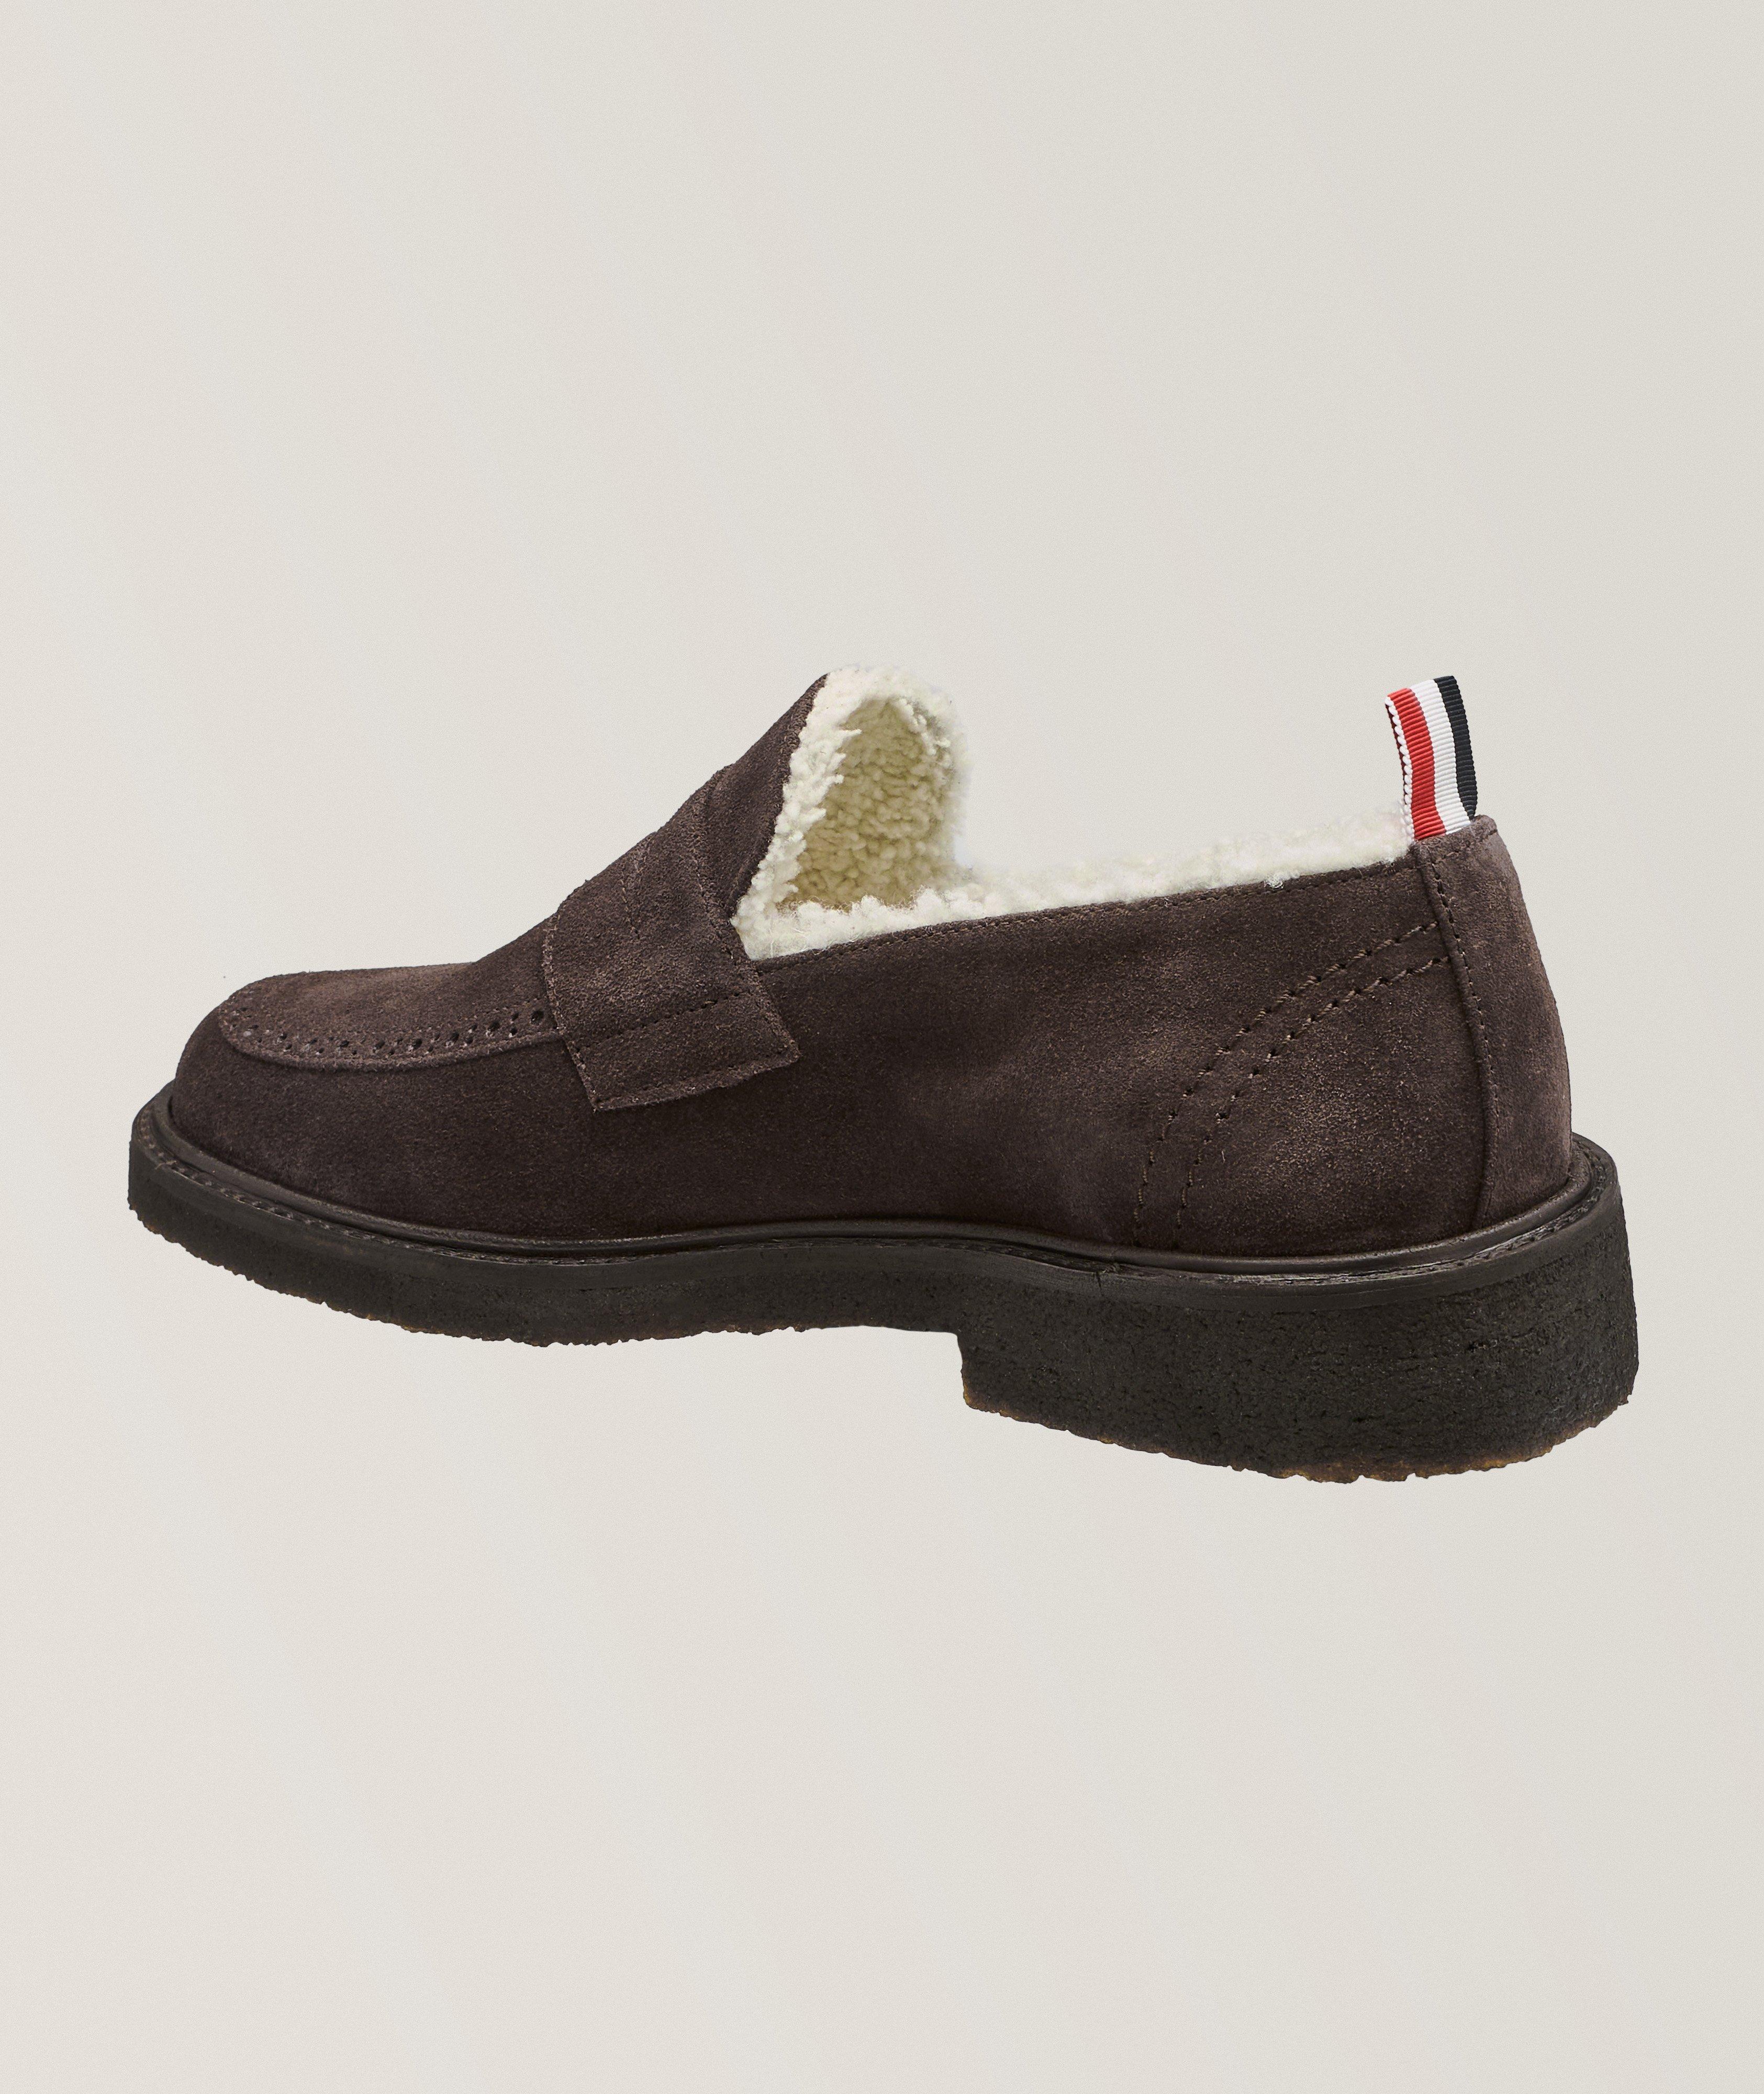 Shearling Lined Suede Penny Loafers  image 1